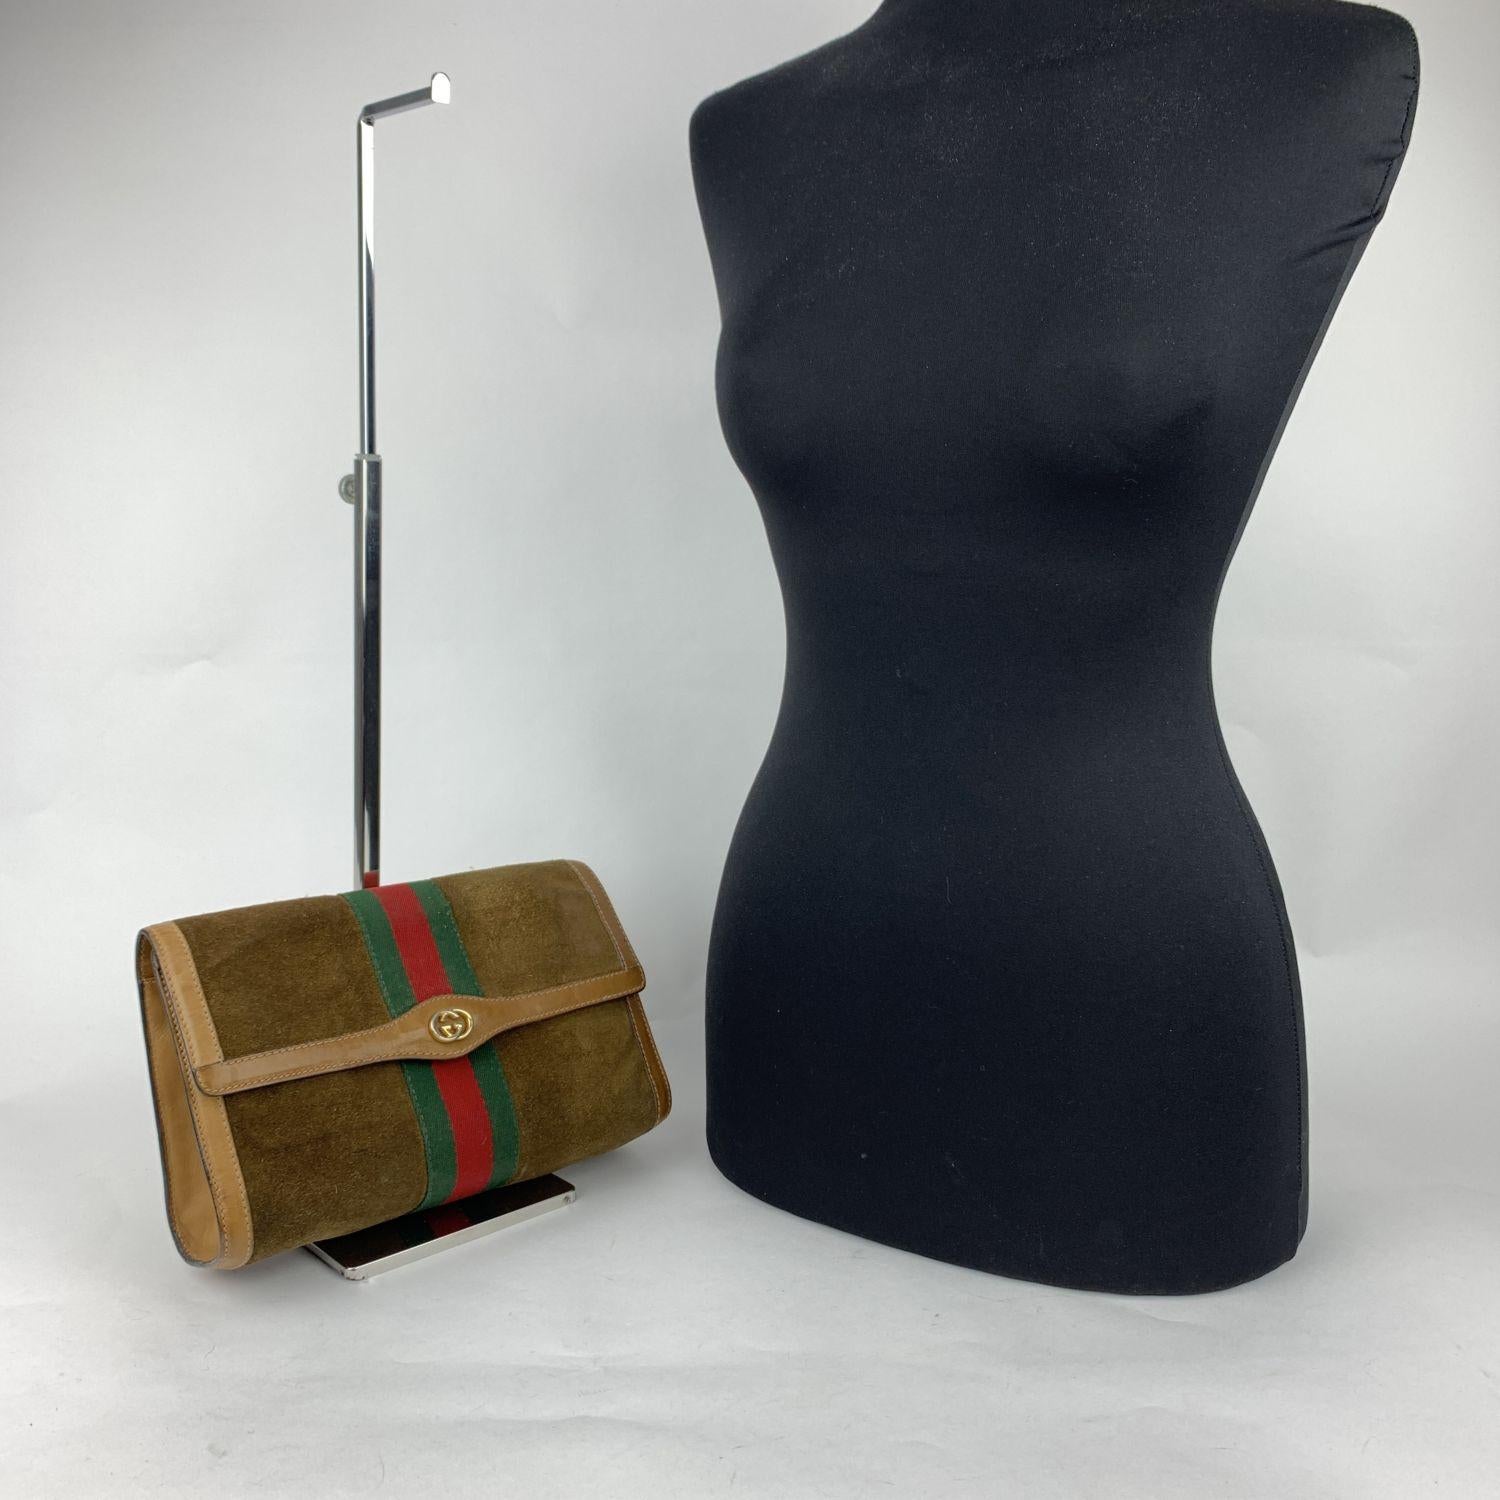 Gucci Vintage flap cosmetic bag with stripes. Brown suede with Genuine Leather trim. Green/Red/Green stripes around the bag. Gold metal GG - GUCCI logo on the front. Flap with button closure on the front. Waterproof lining with monogram pattern.